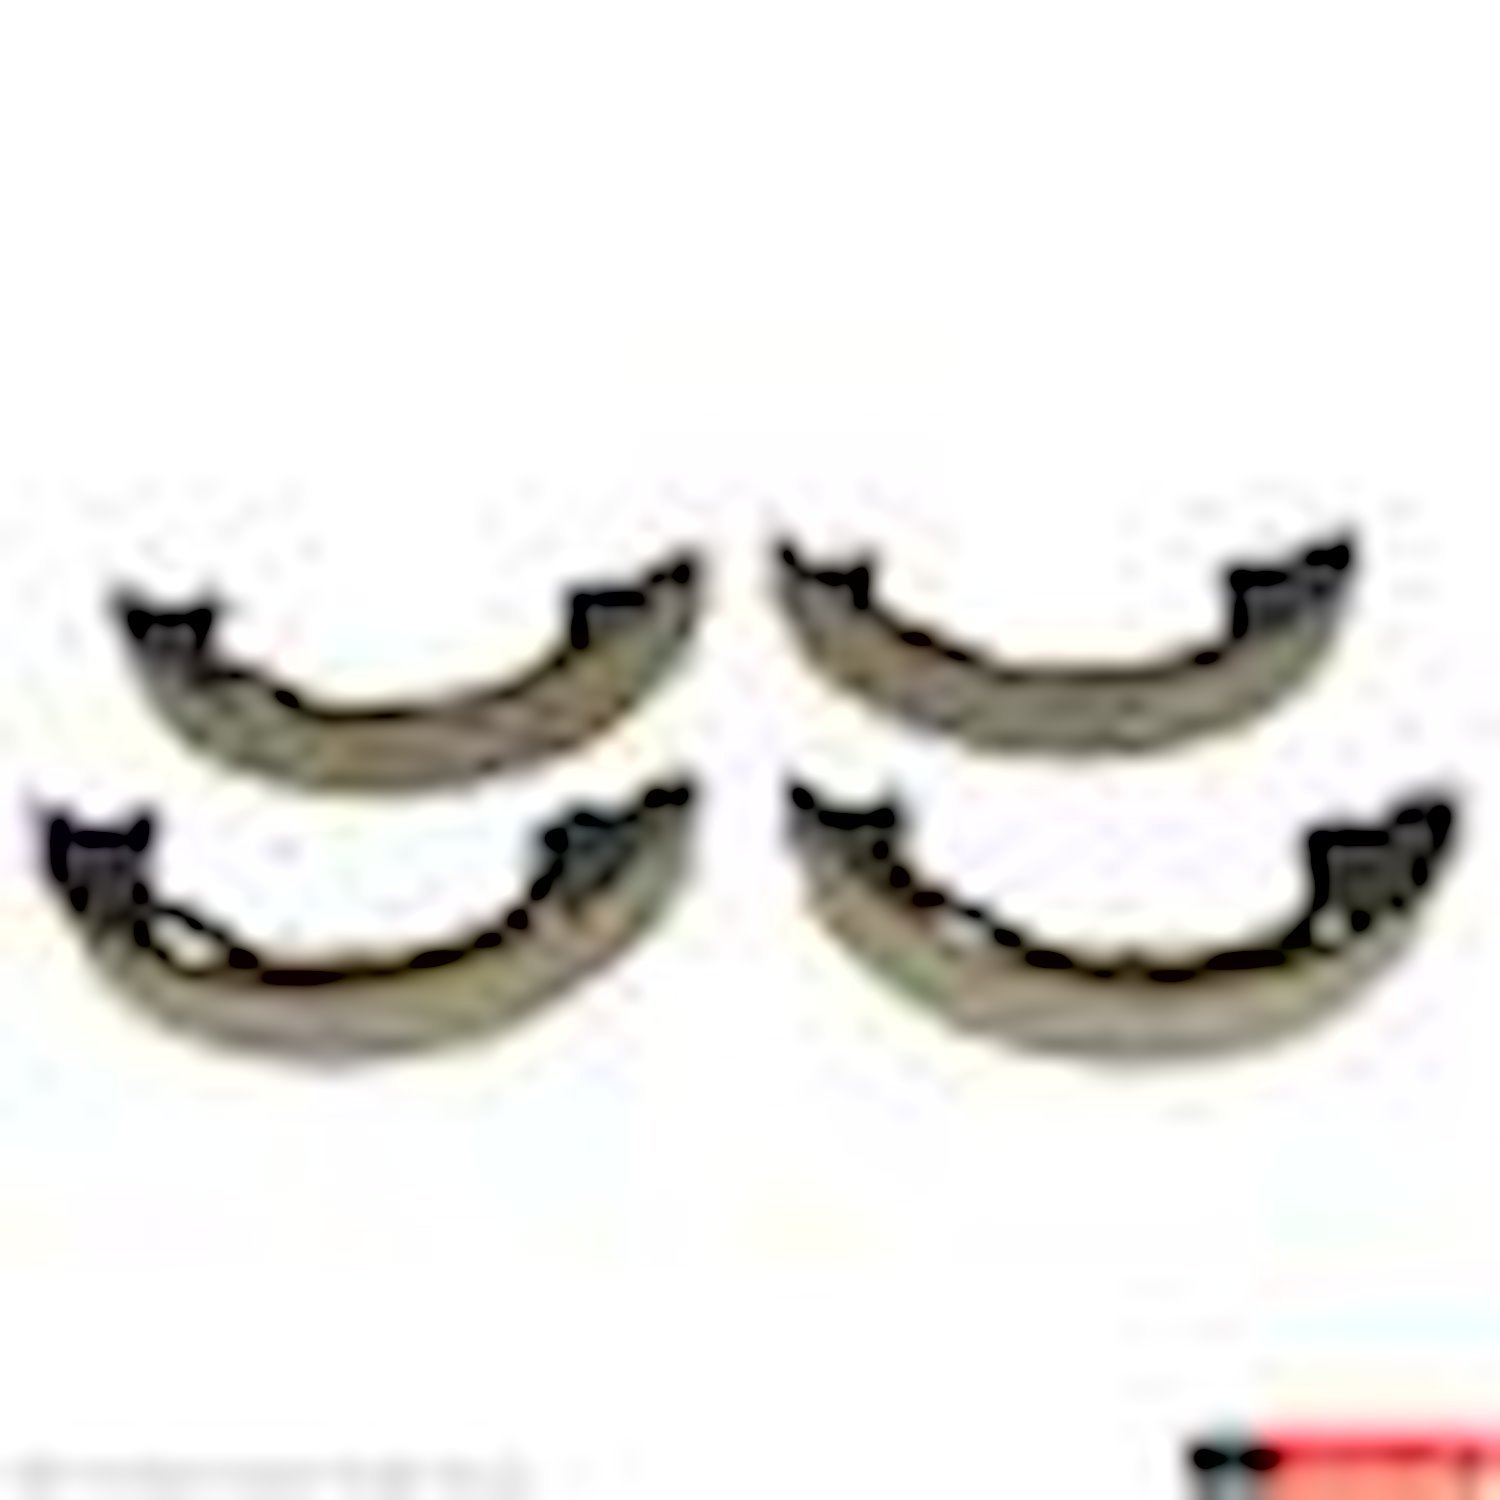 Parking Brake Shoes for Select 2003-2011 Ford, Lincoln, Mercury